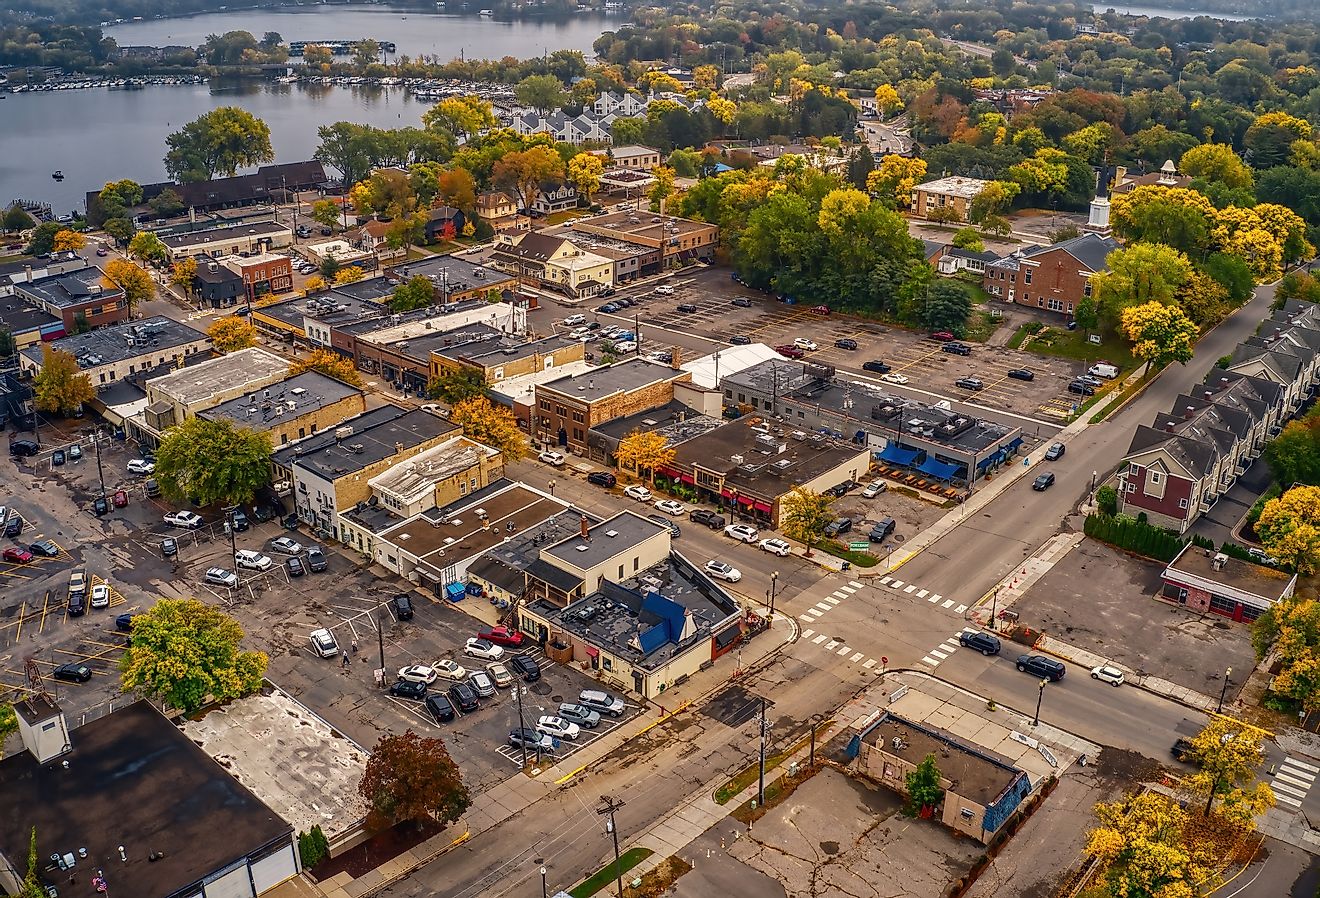 Aerial View of the Twin Cities Suburb of Excelsior, Minnesota. Image credit Jacob via AdobeStock.